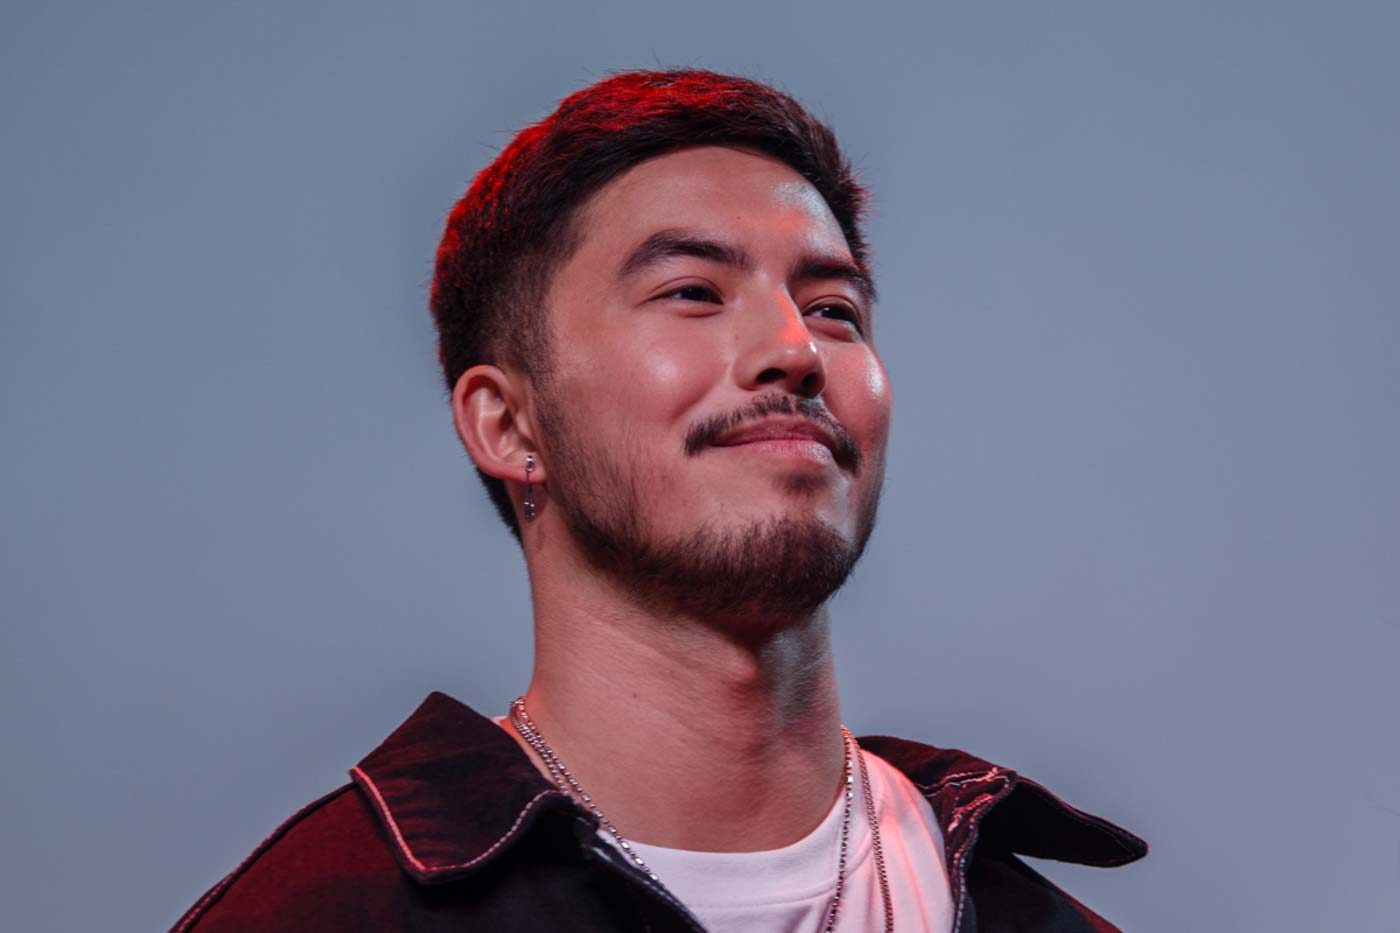 Black Sheep is doing a BL series starring Tony Labrusca